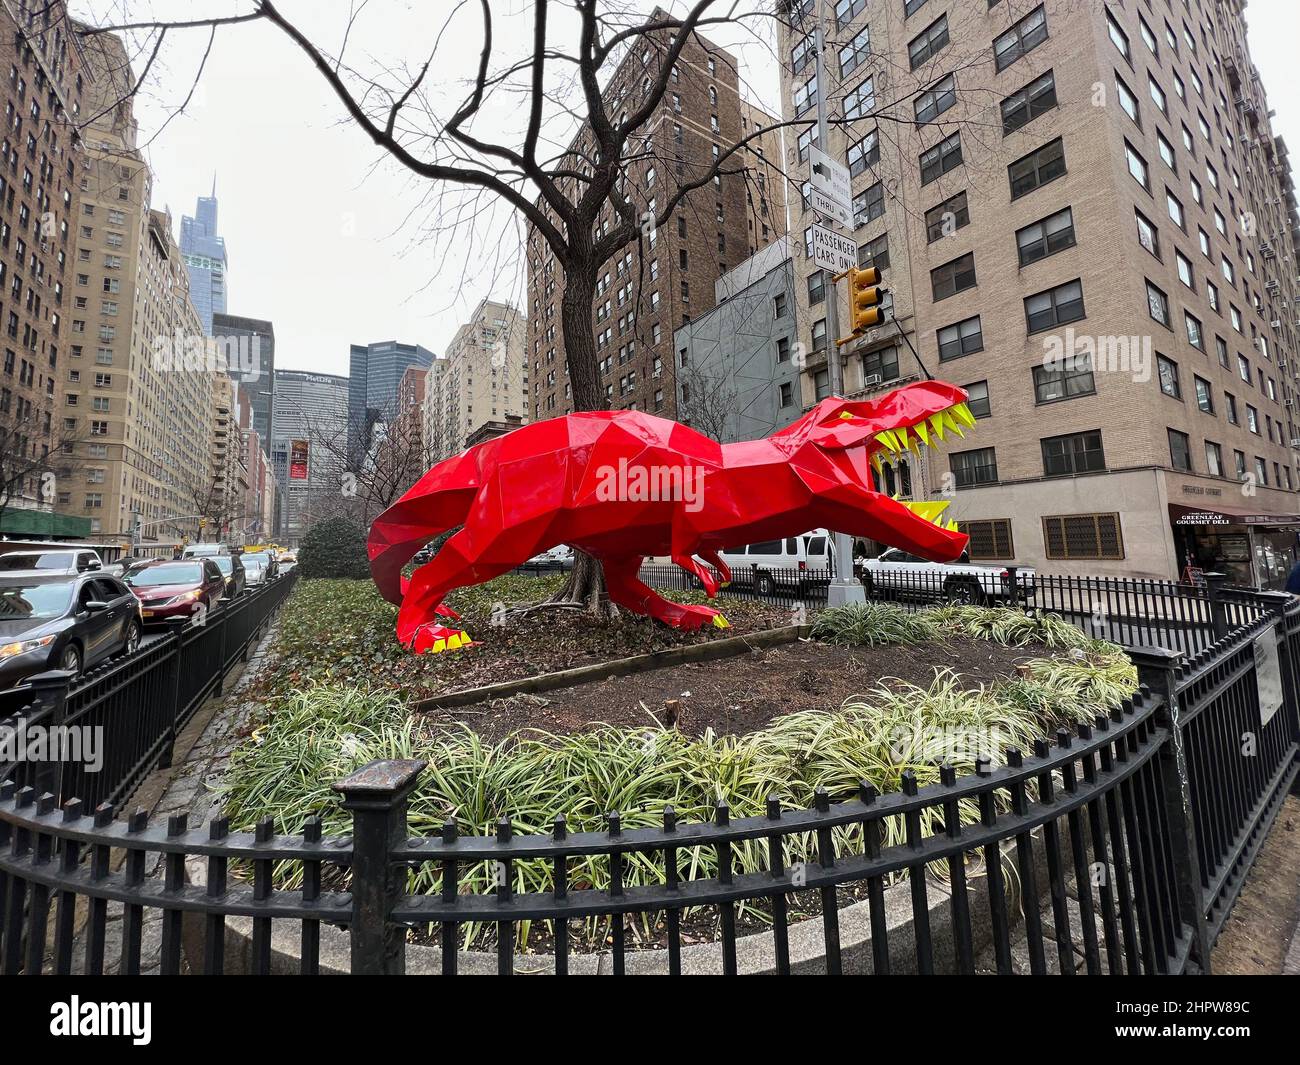 New York, United States. 23rd Feb, 2022. Rexor the Tyrannosaurus Rex by artist Idriss B. stands in the flower bed mall in between Park Avenue in New York on Feb. 23, 2022. Rexor is part of an outdoor art installation supported by Patrons of Park Avenue, a neighborhood association in the Murray Hill neighborhood of New York. (Photo by Samuel Rigelhaupt/Sipa USA ) Credit: Sipa USA/Alamy Live News Stock Photo